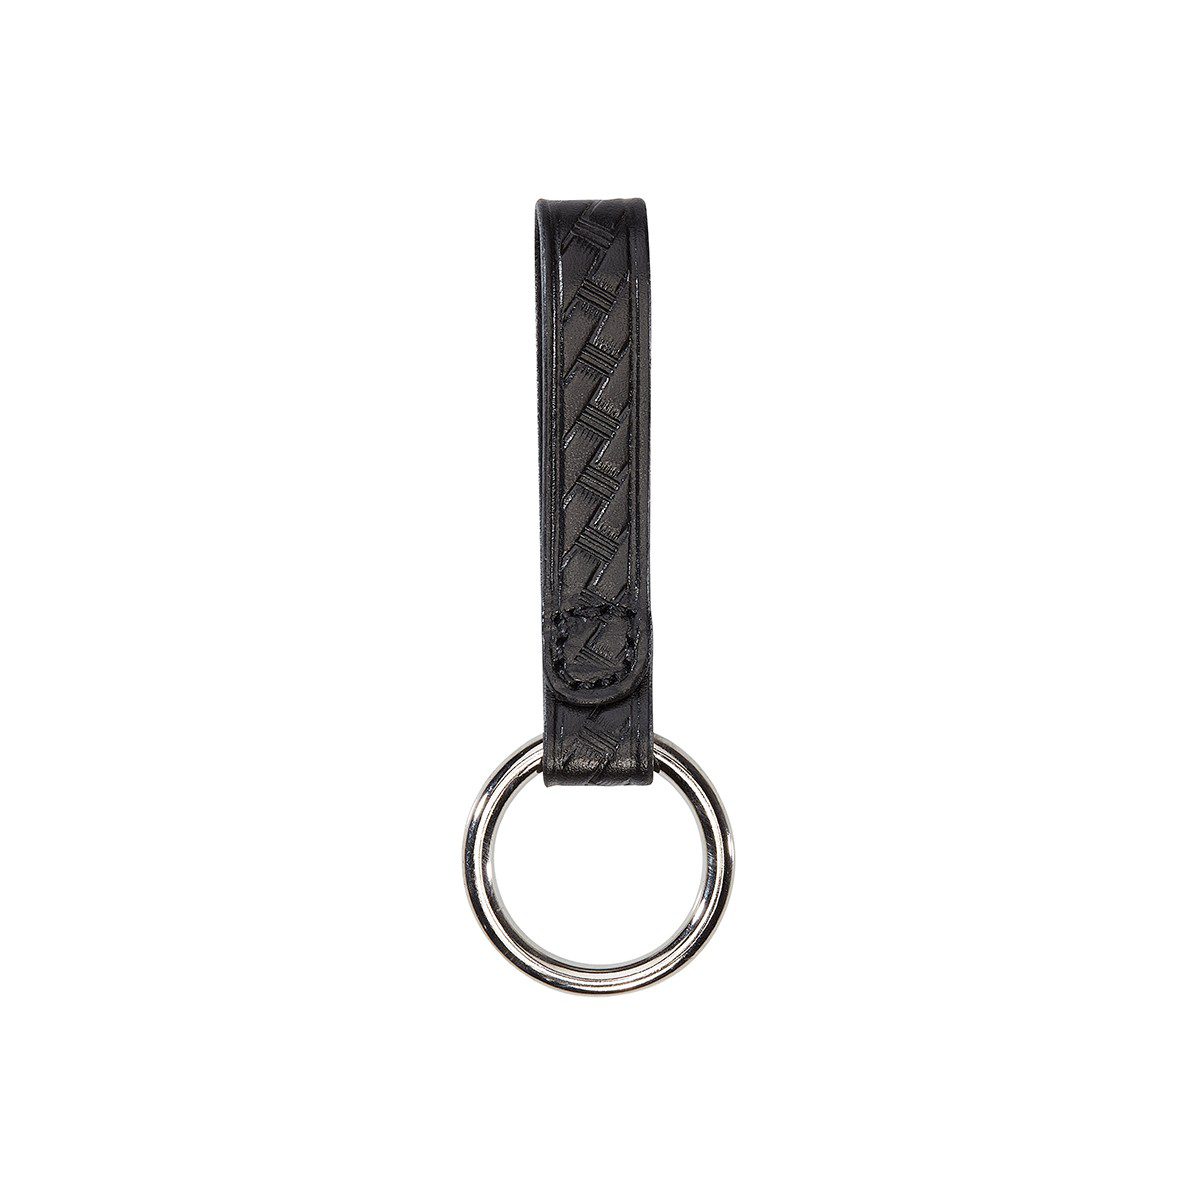 Aker Leather Baton Ring Strap 550 - Newest Arrivals